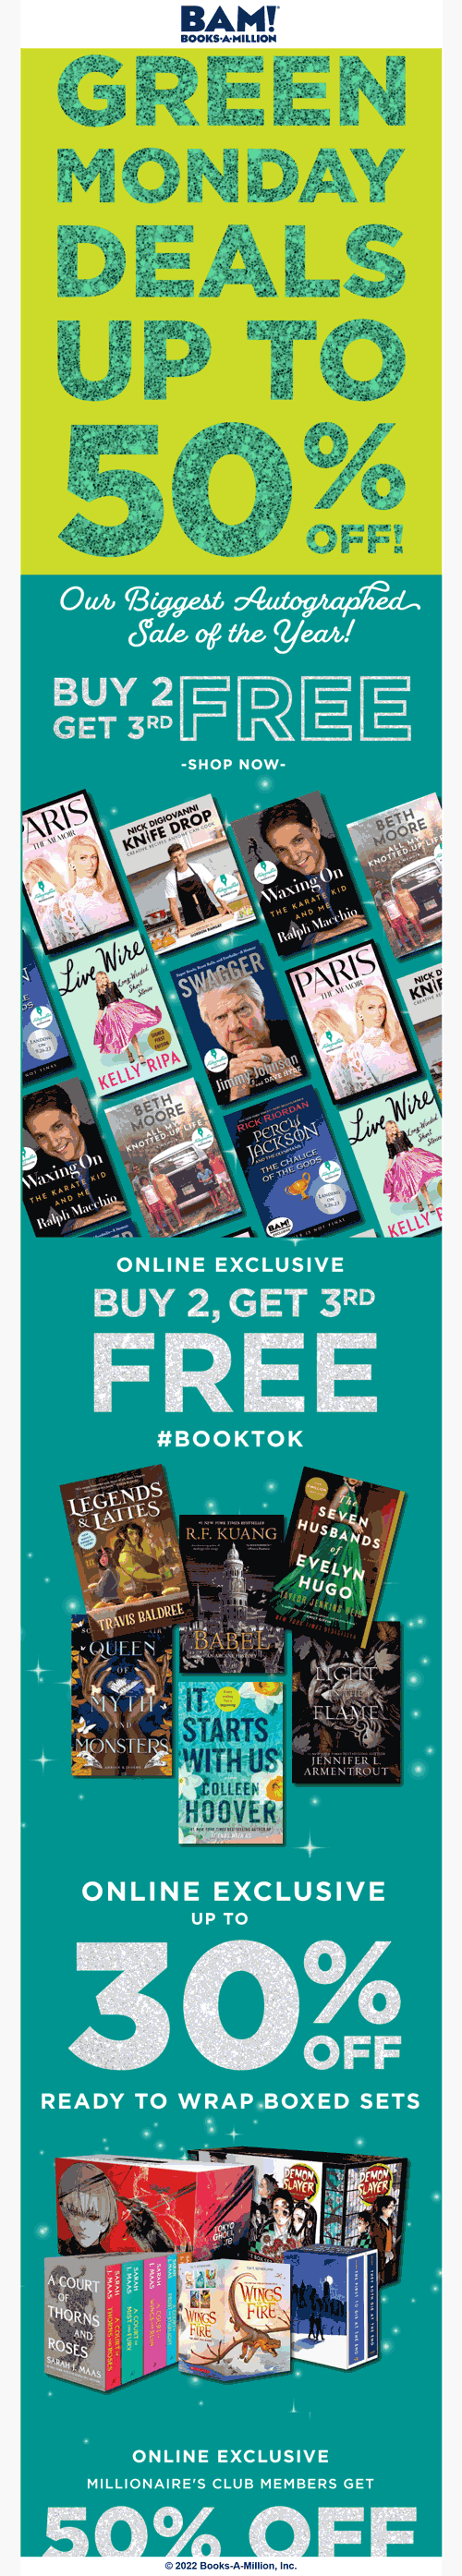 Books-A-Million stores Coupon  3rd book free online today at Books-A-Million #booksamillion 